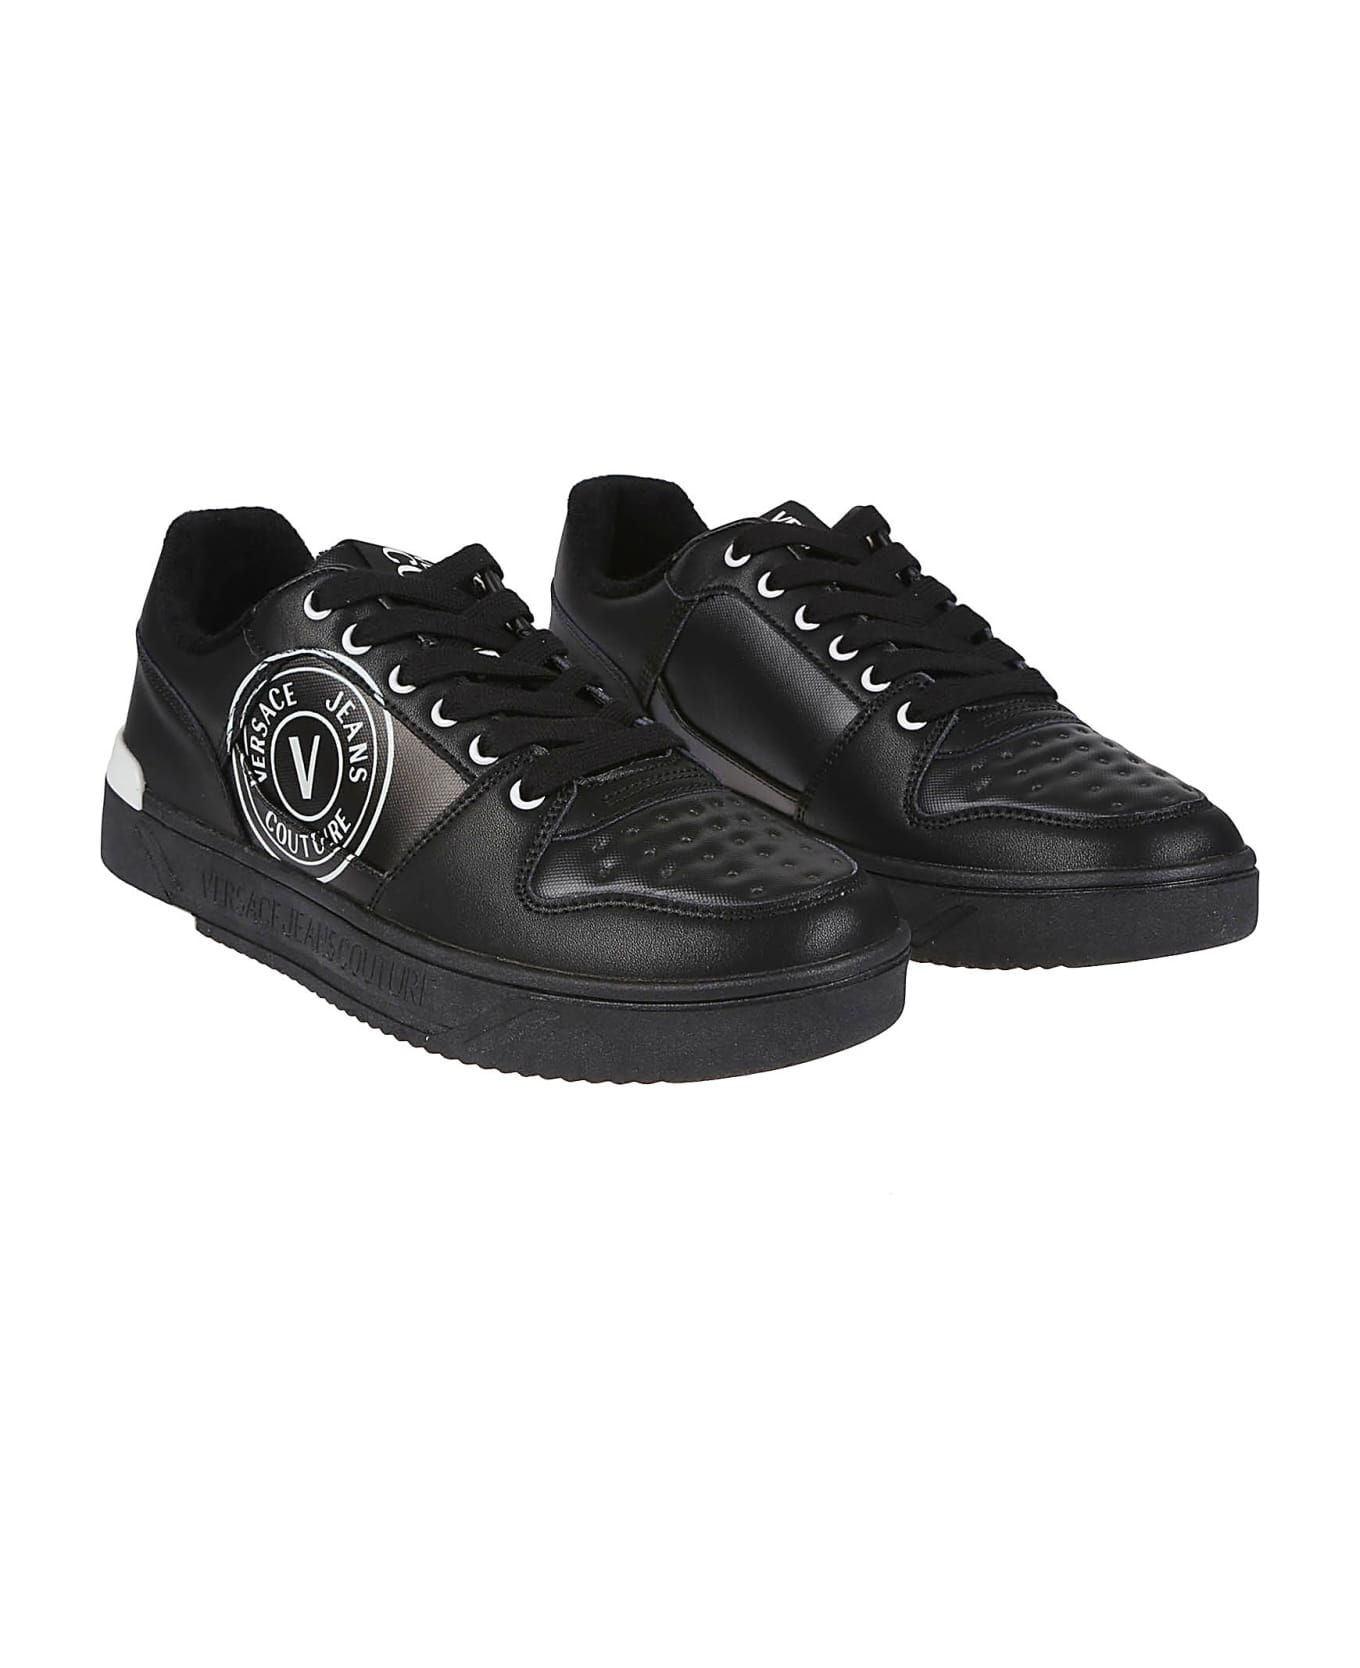 Versace Jeans Couture Starlight Sj1 Sneakers - Black スニーカー